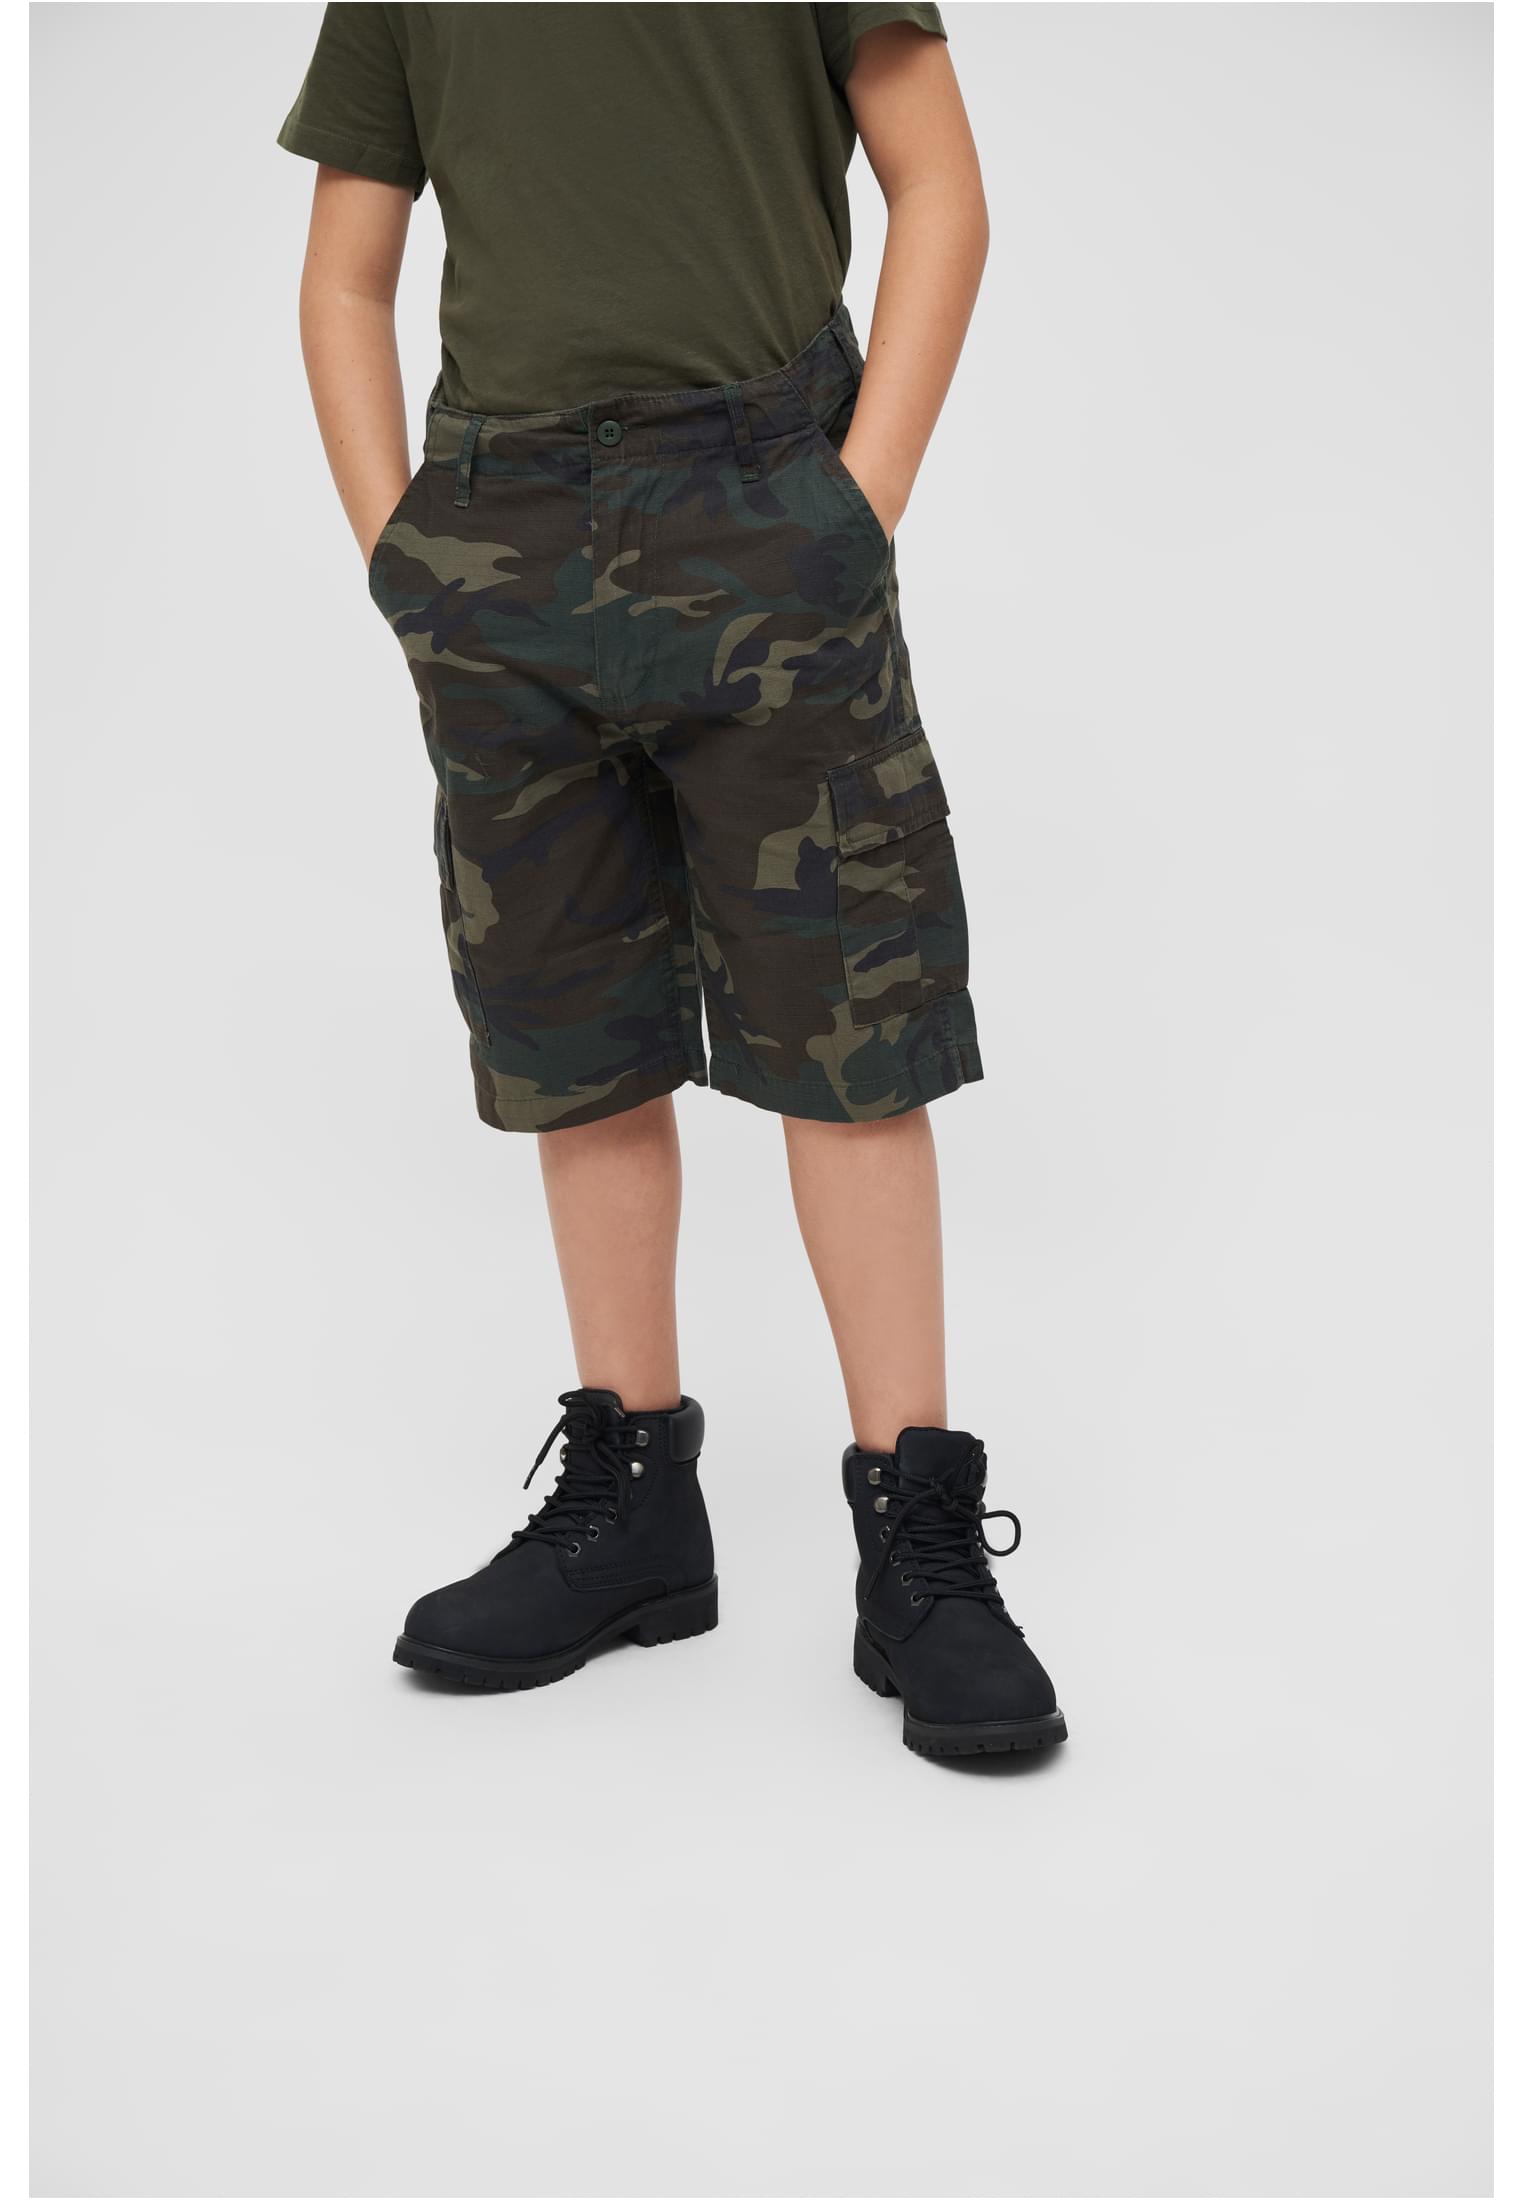 Kinder Kids BDU Ripstop Shorts in Farbe woodland